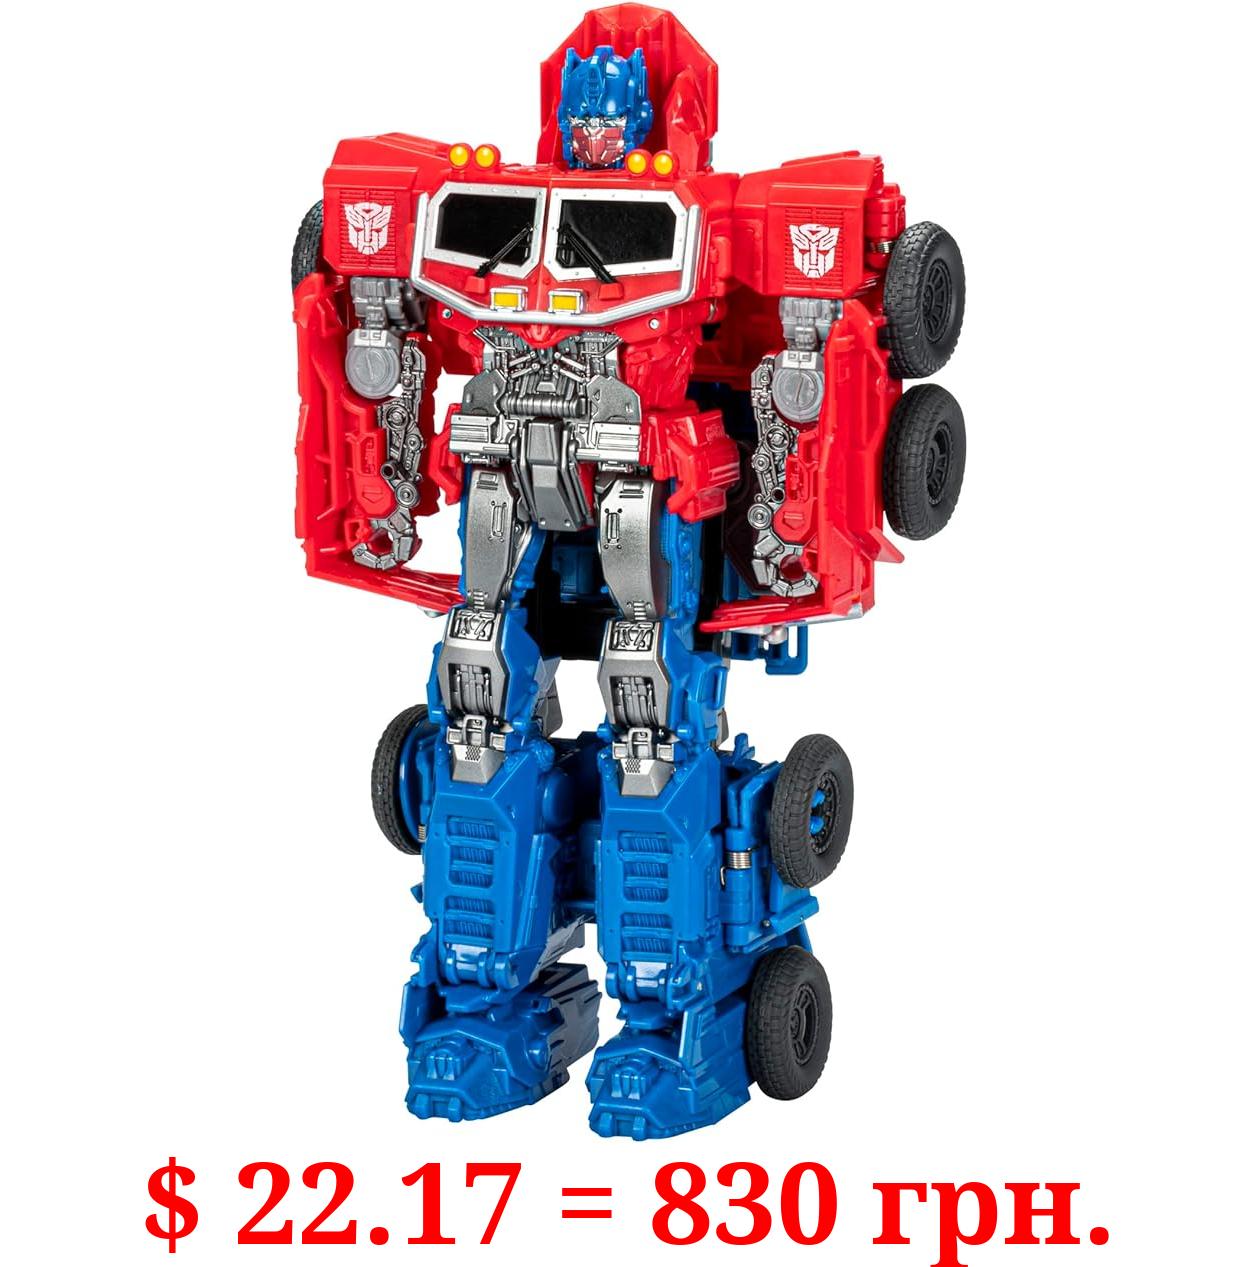 Transformers Bumblebee Cyberverse Adventures Dinobots Unite Smash Changer Optimus Prime Action Figure, Toys for 6 Year Old Boys and Girls and Up, 9-Inch